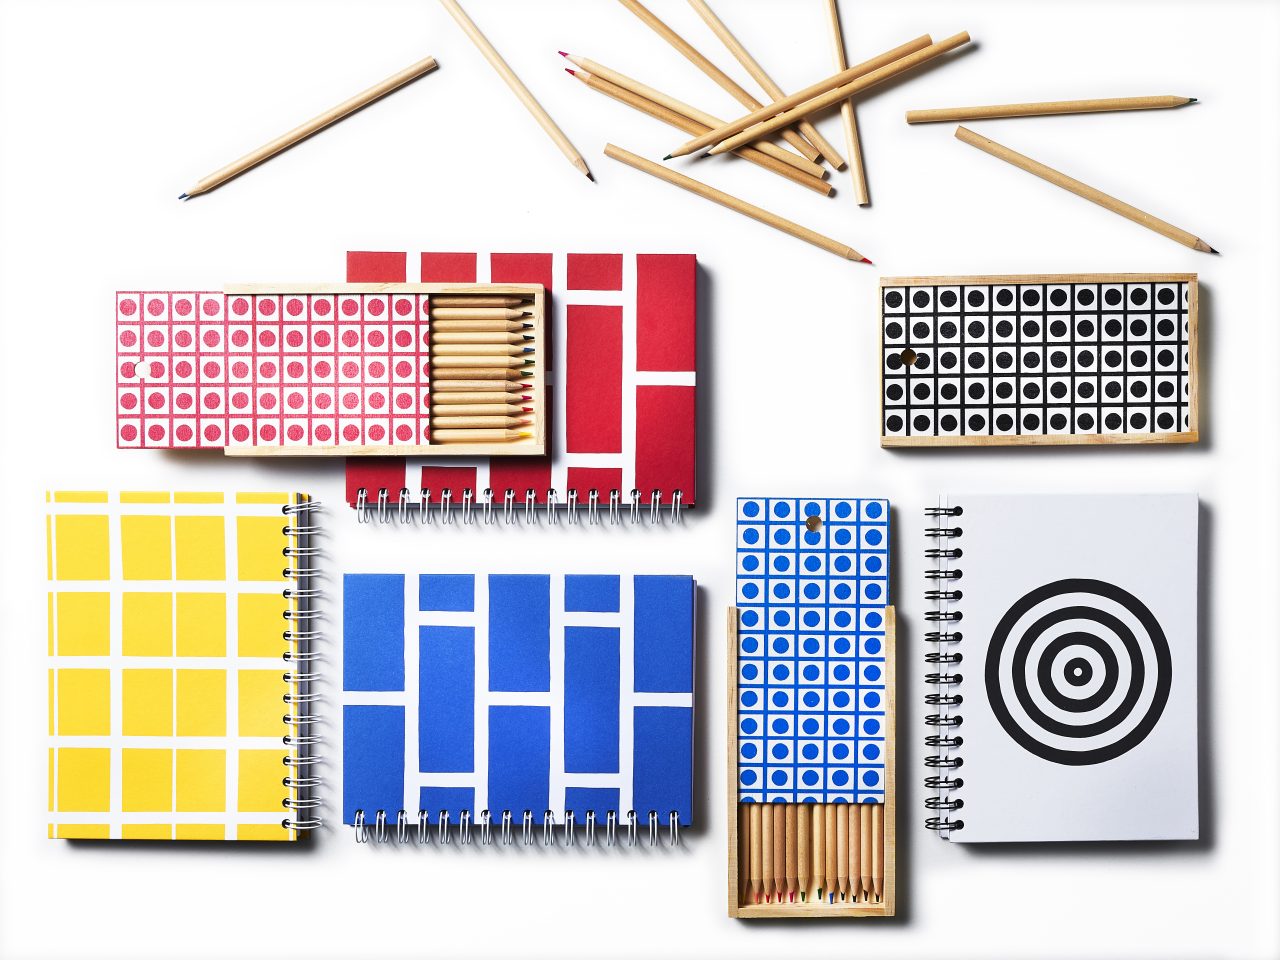 Notebooks, pens and wooden penholders with graphic patterns in blue/white, yellow/white, red/white, black/white.